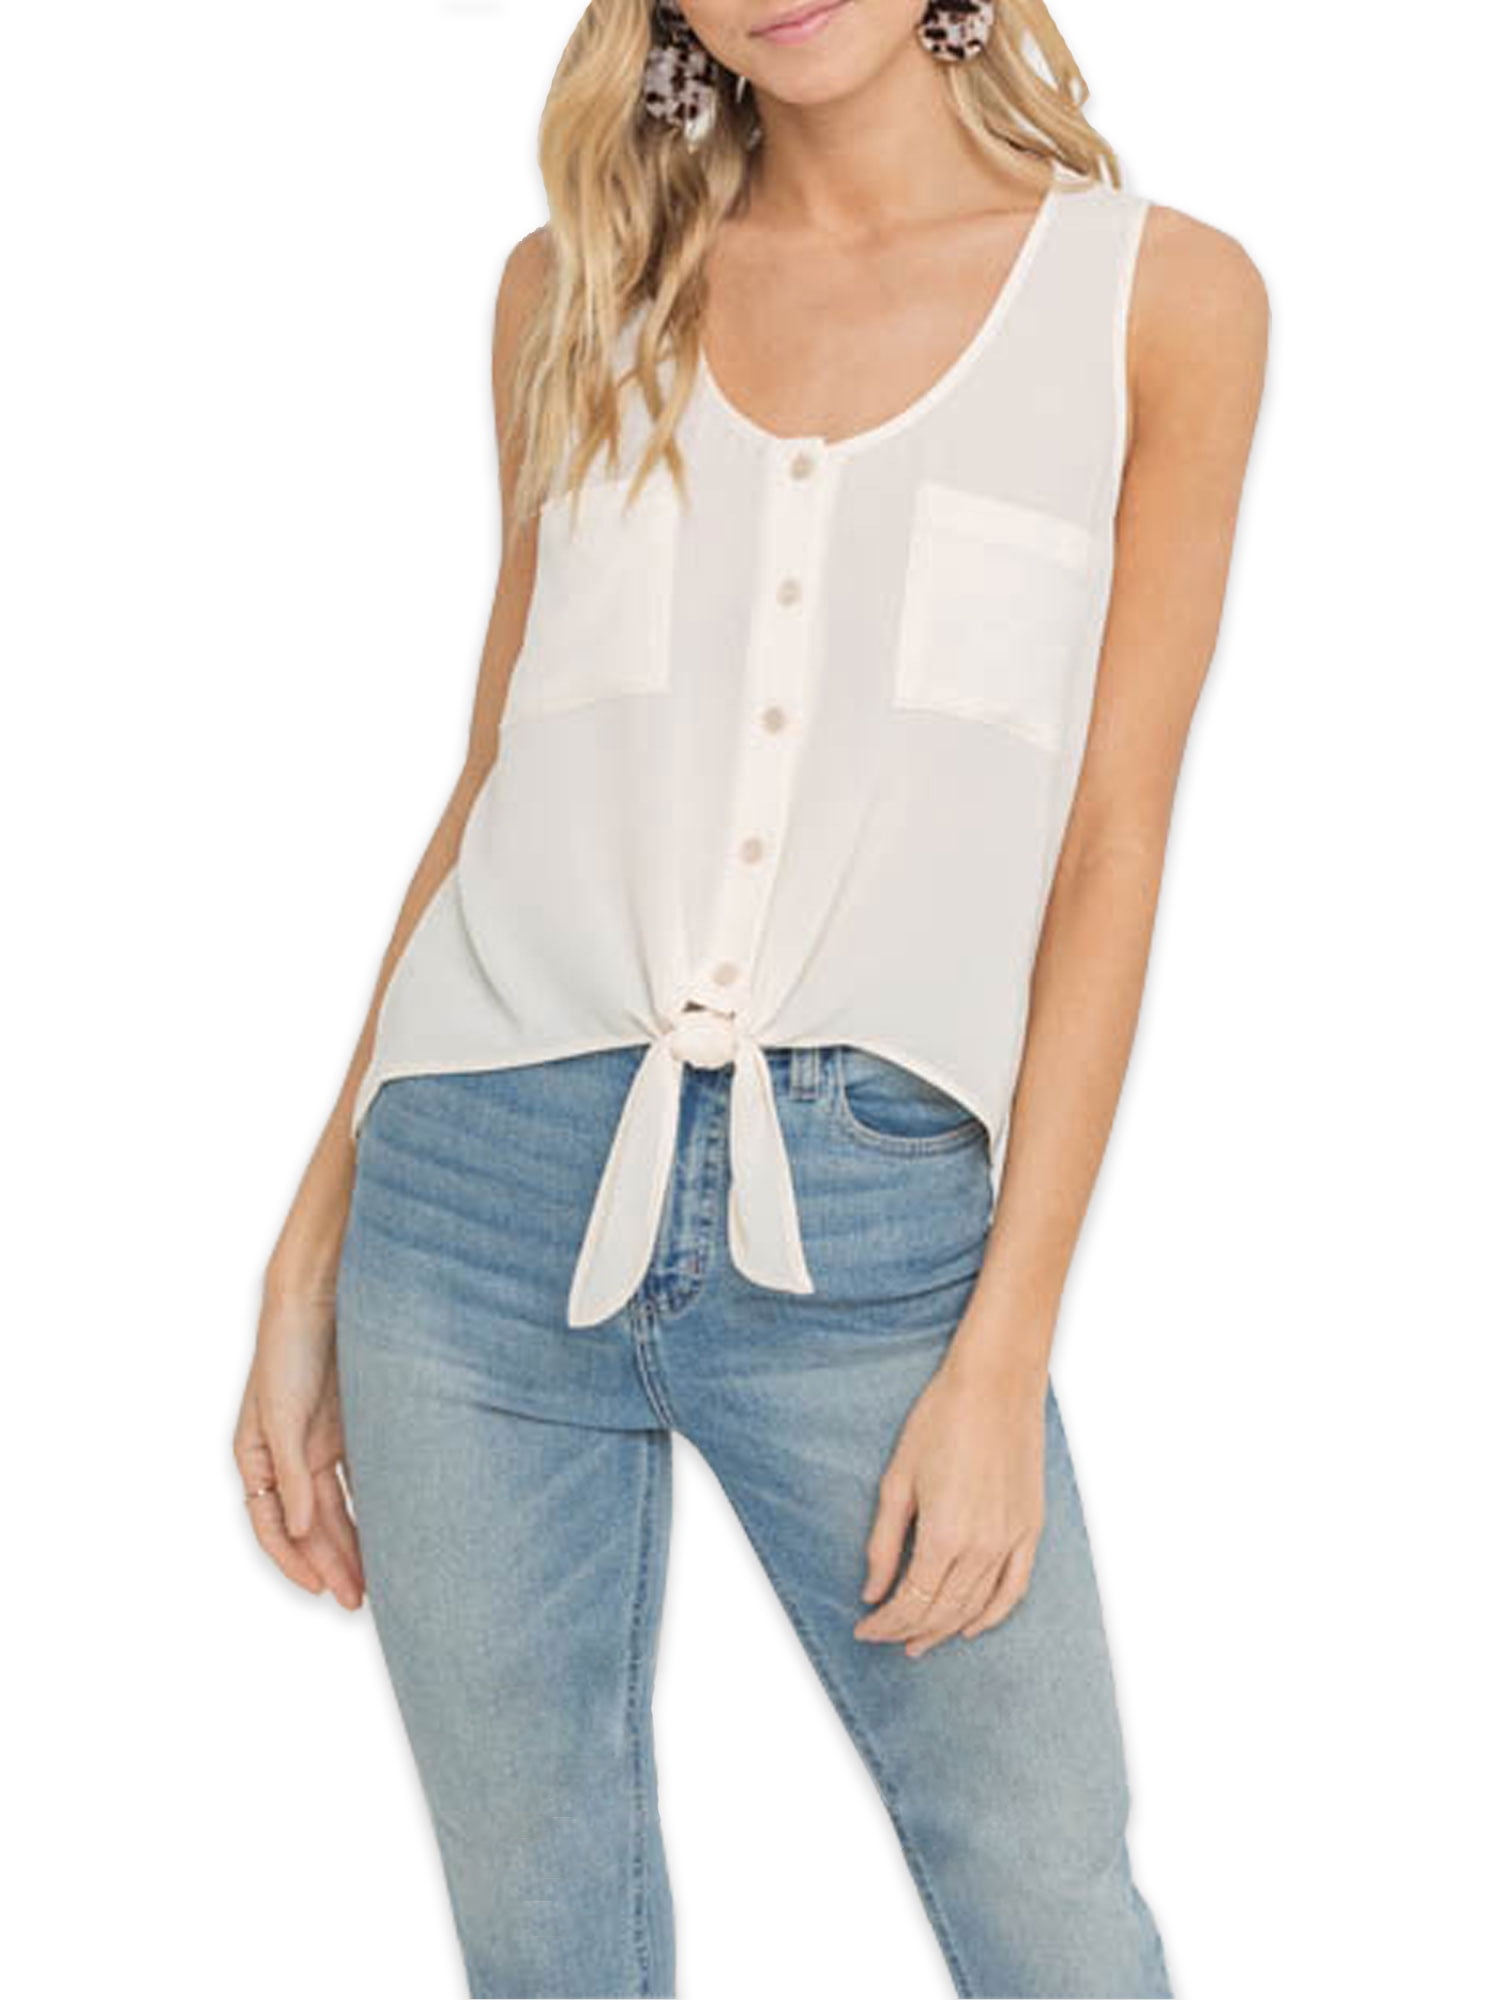 Lush Clothing - Lush Clothing Buttonfront Tie Top - Walmart.com ...